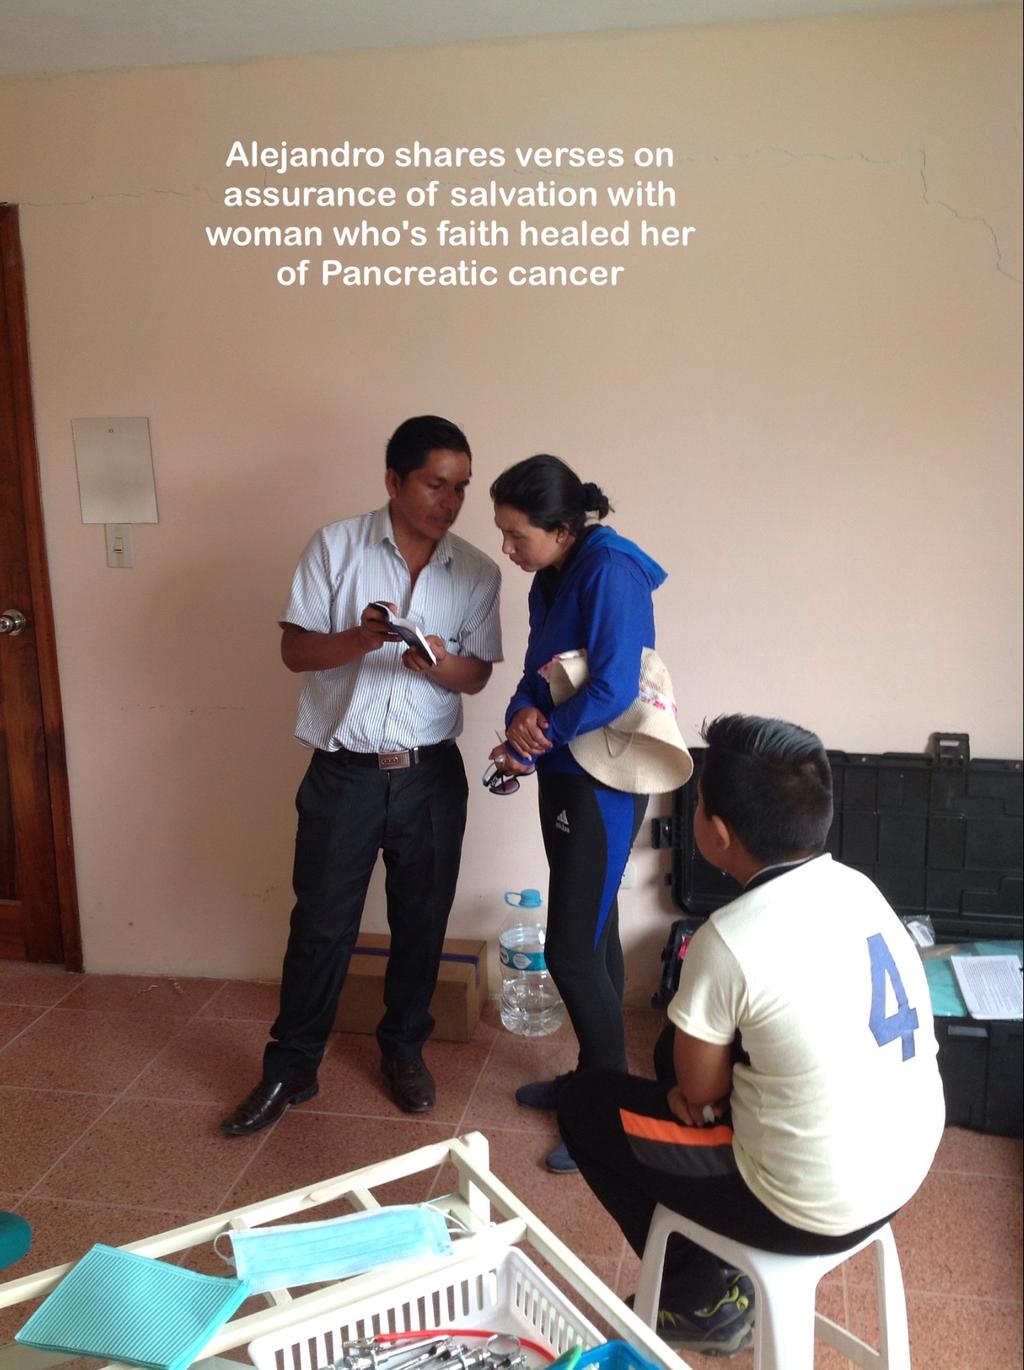 A young lady shared with those in the dental clinic how her faith in God resulted in her being healed of pancreatic cancer.